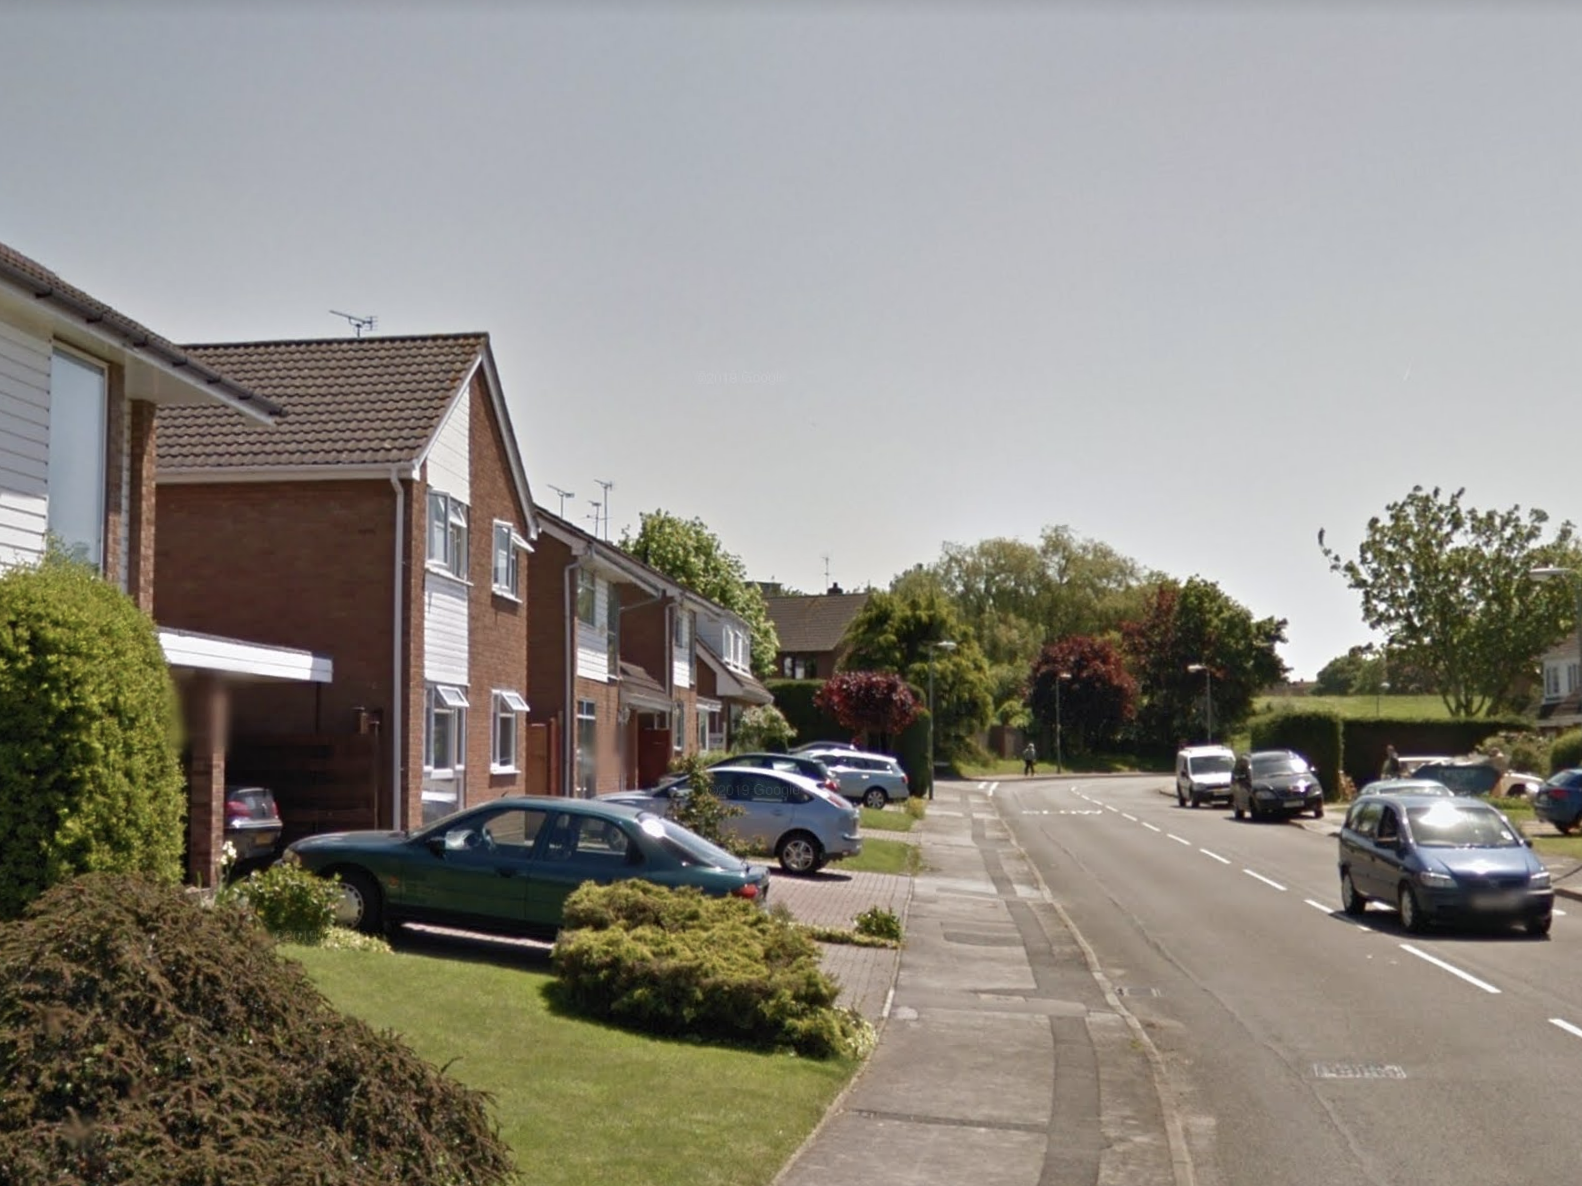 Valley Road in Leamington Spa, where 54-year-old woman was found dead